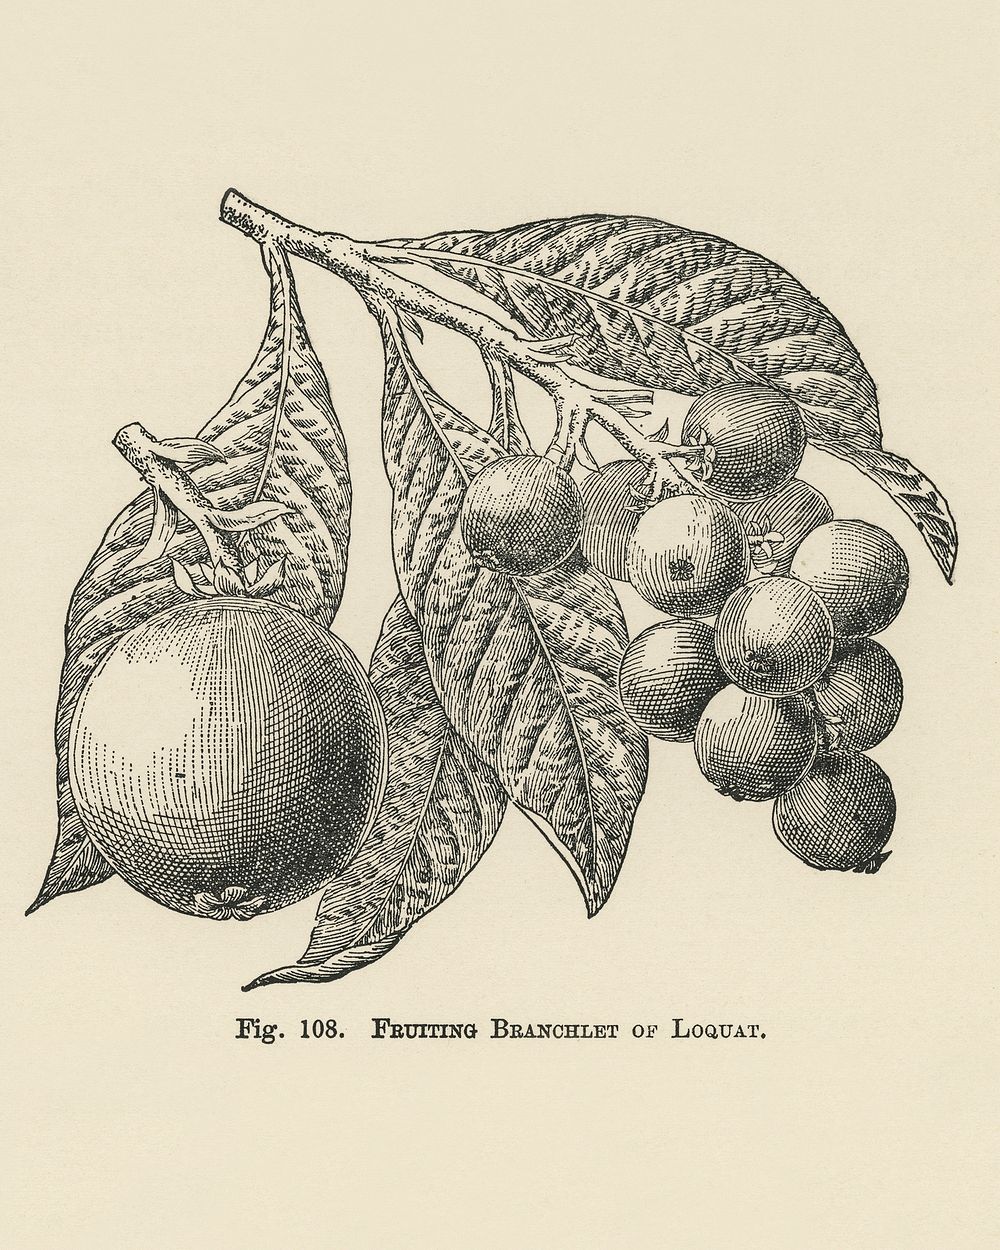 Vintage illustration of loquat digitally enhanced from our own vintage edition of The Fruit Grower's Guide (1891) by John…